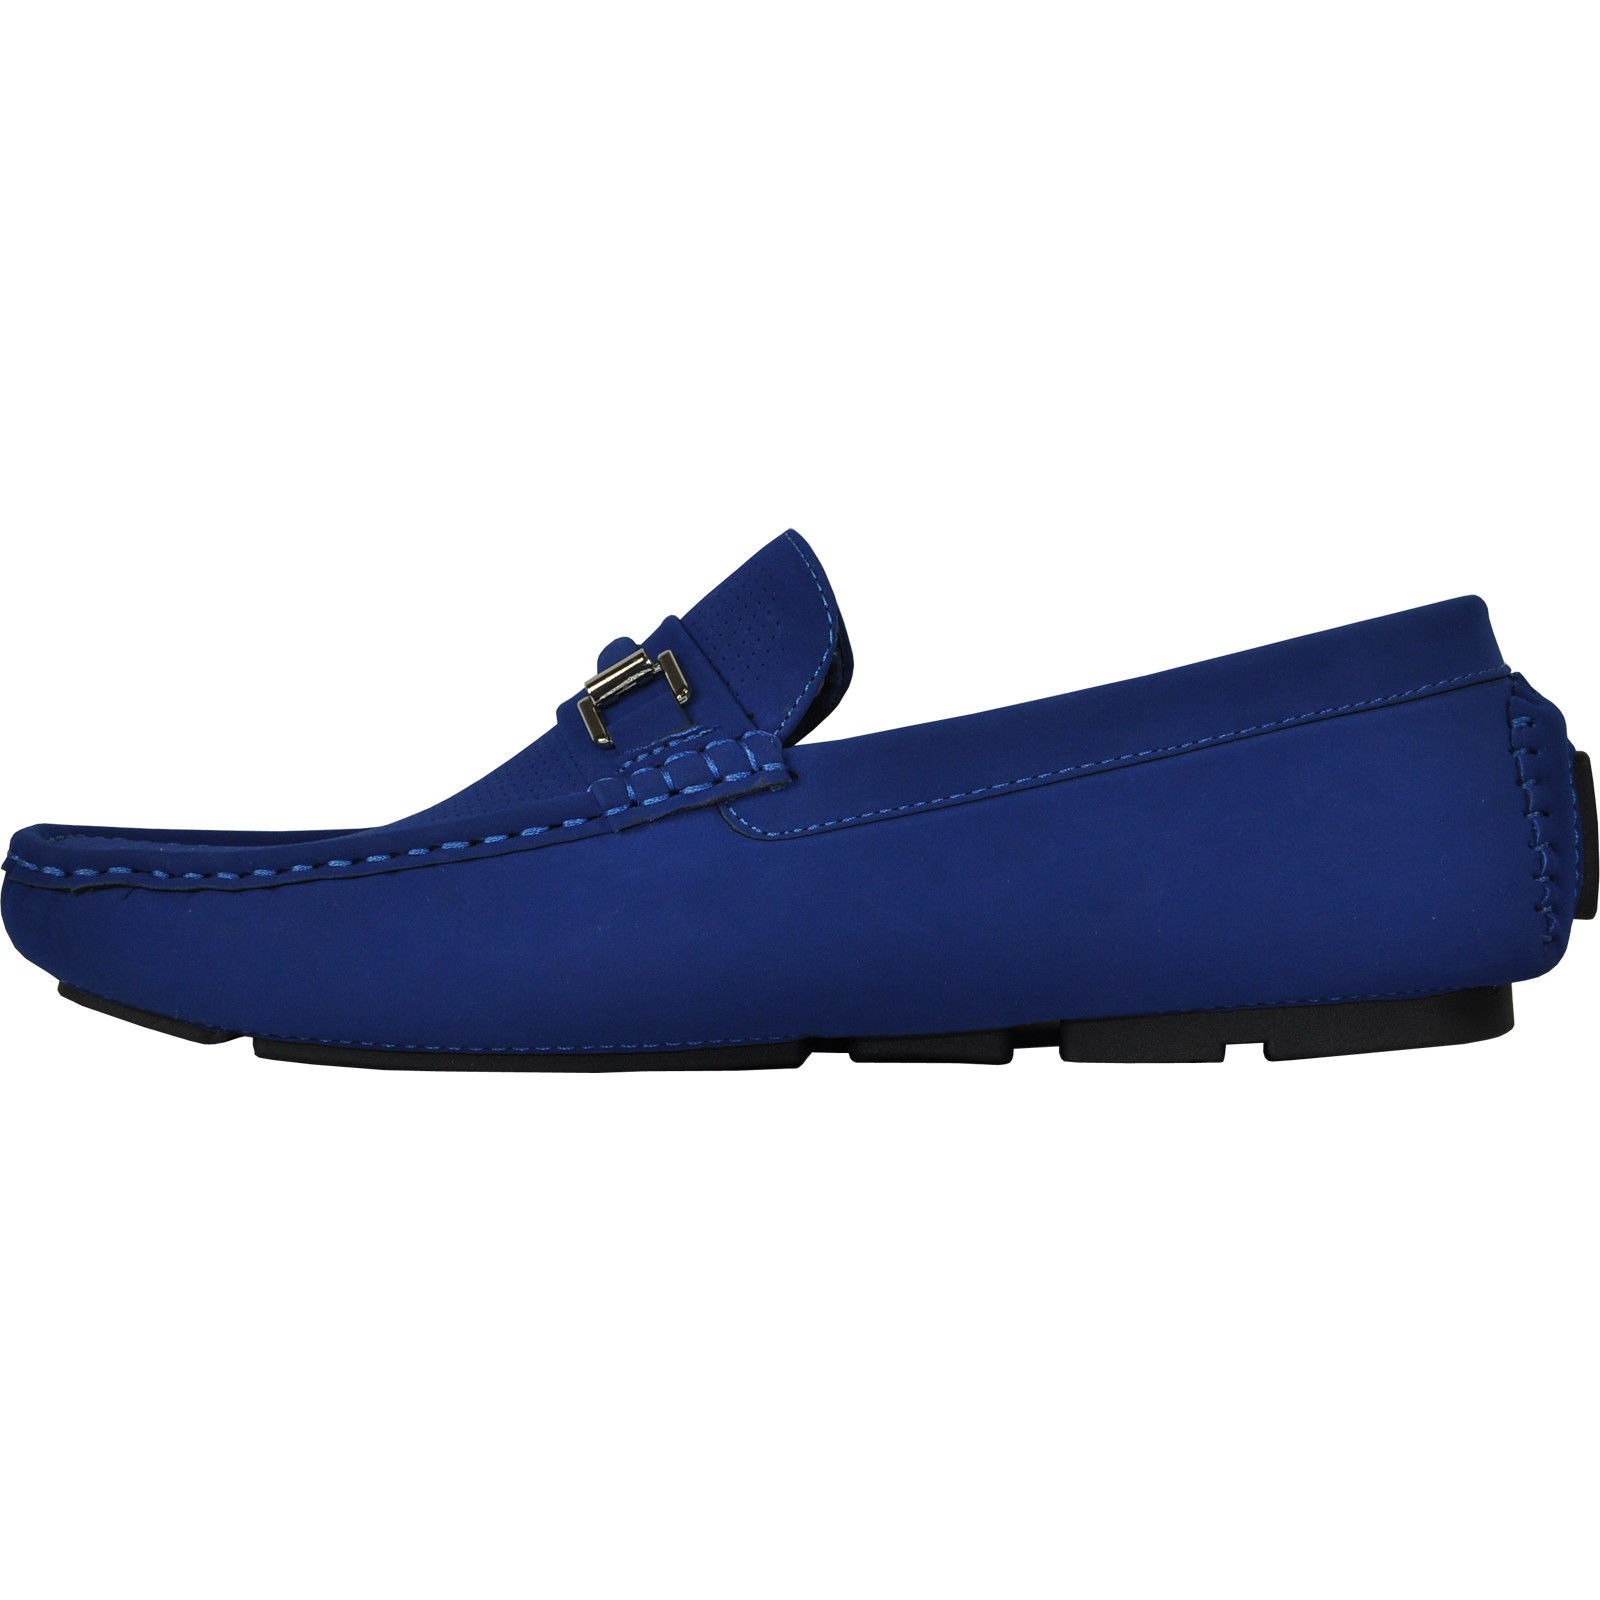 Bravo! Men Casual Shoe Todd-1 Driving Moccasin Blue 13M US - image 5 of 7